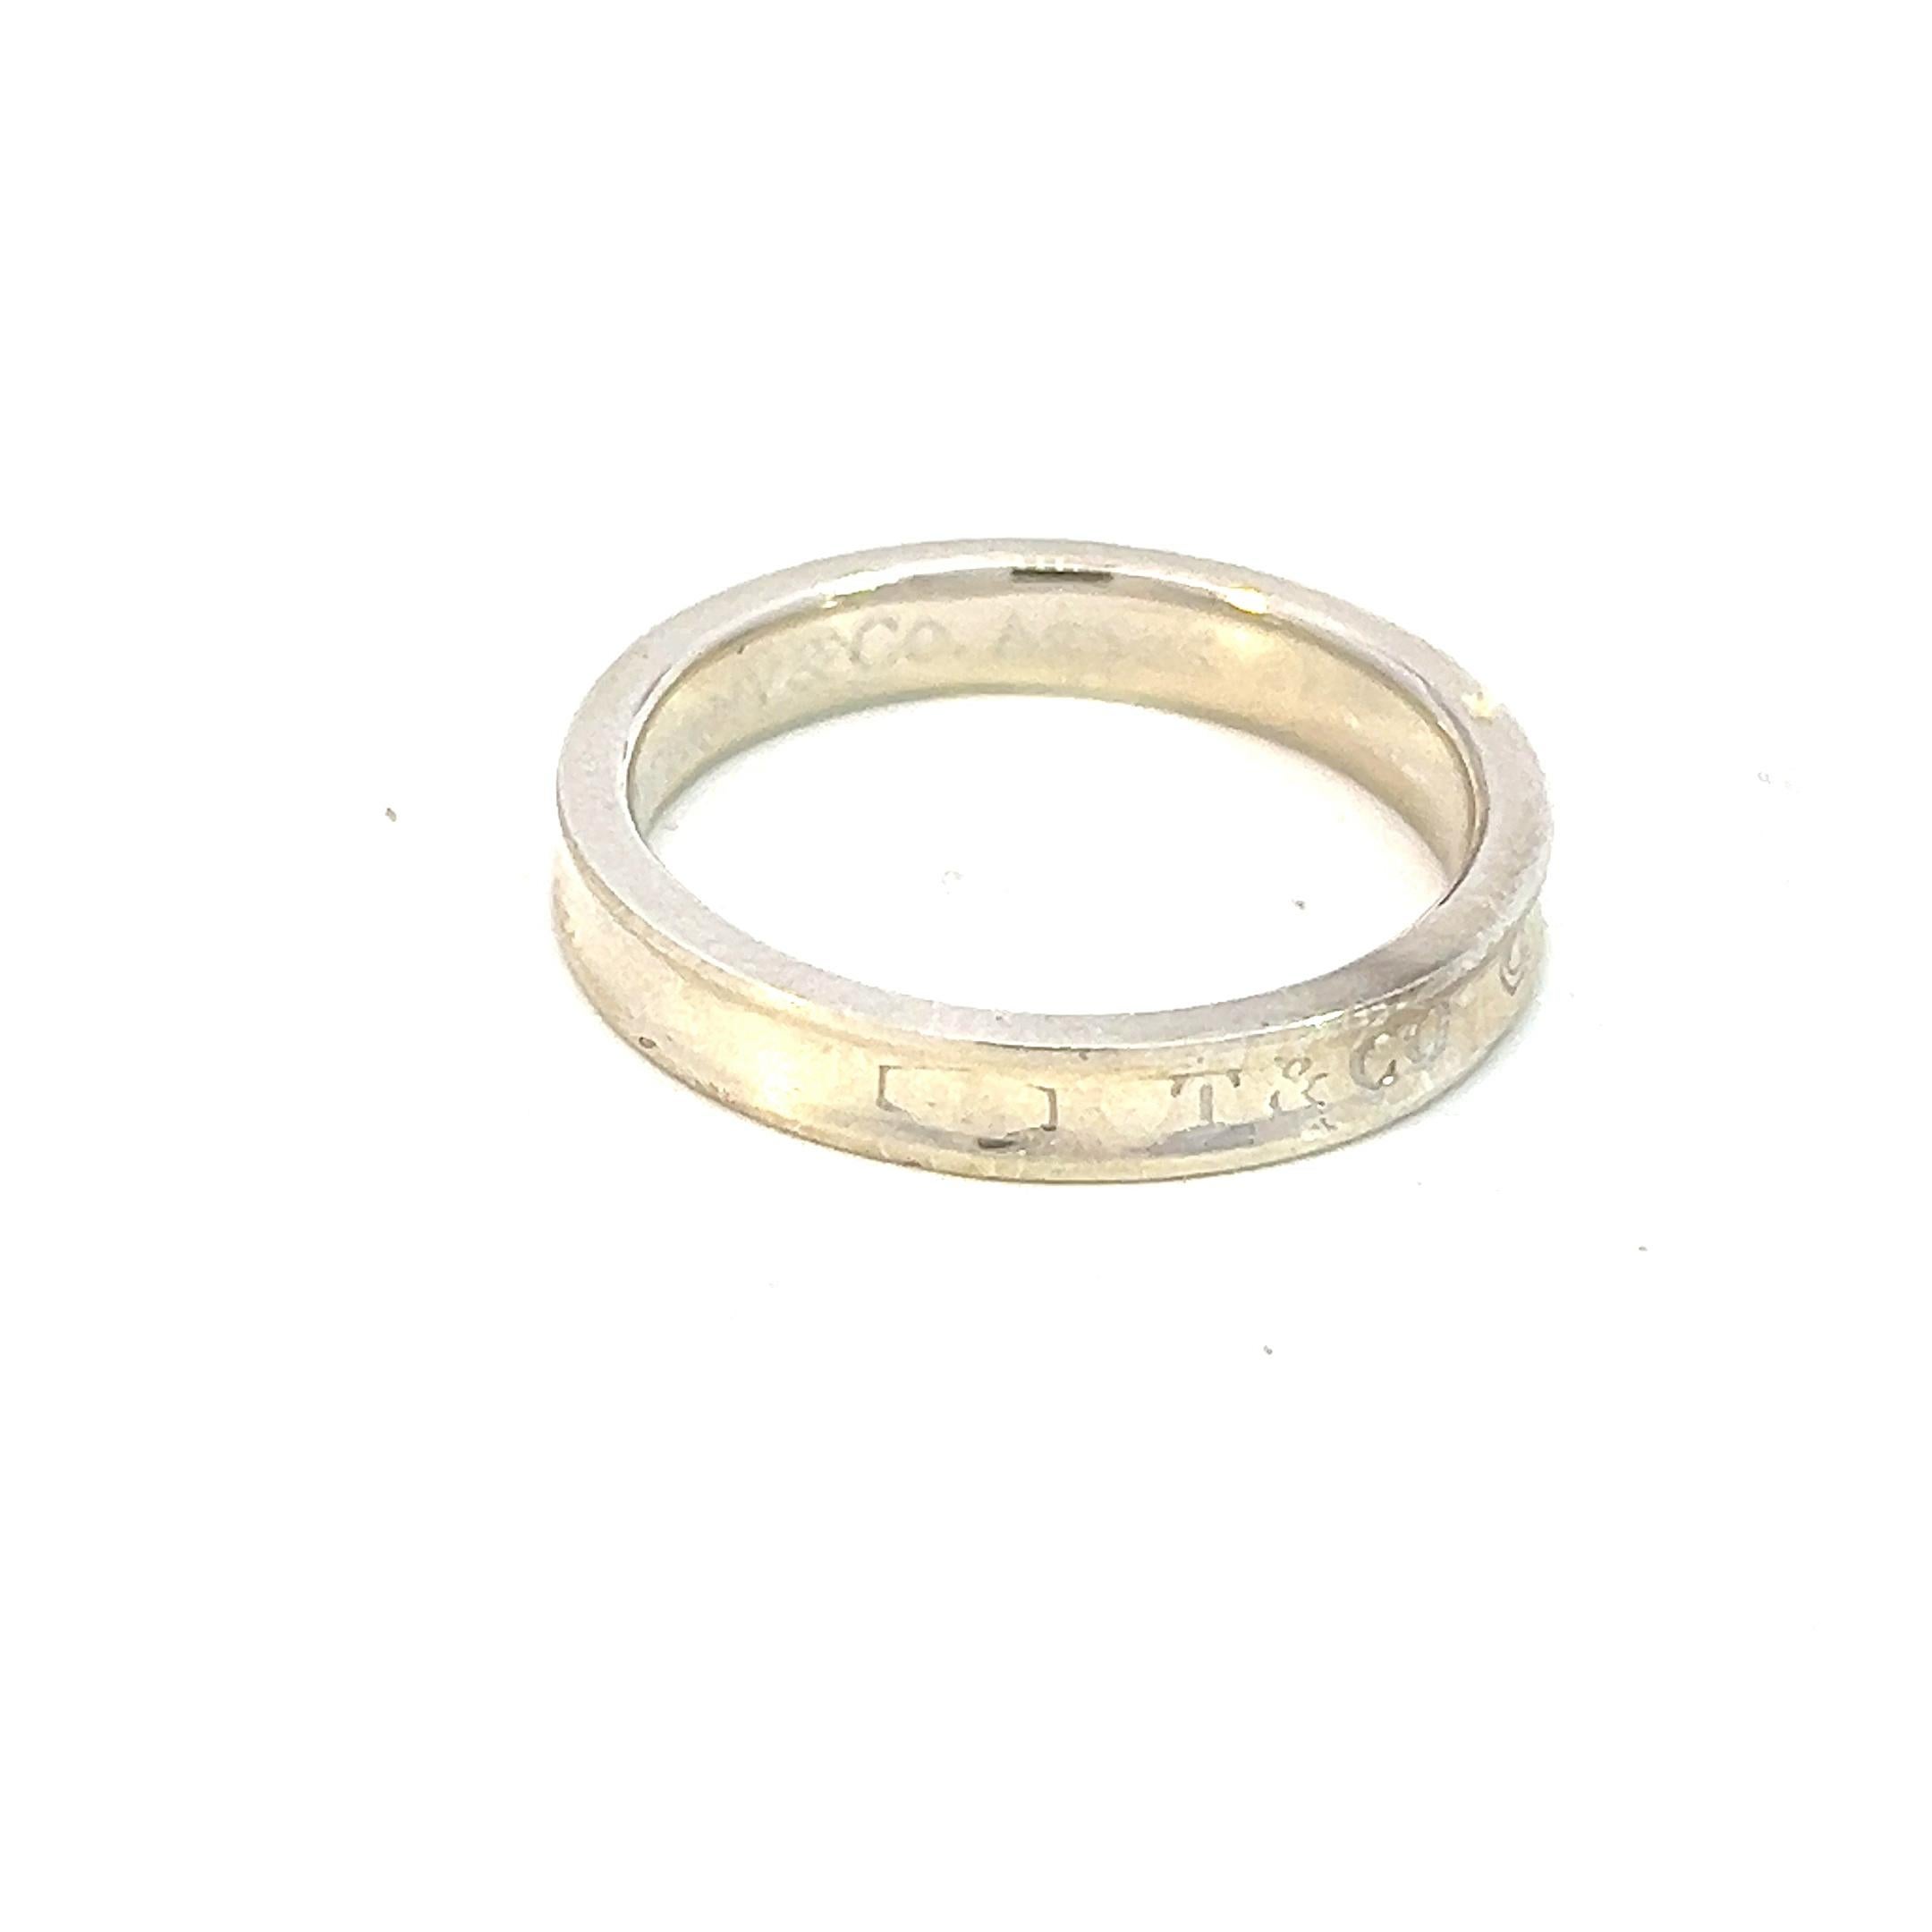 Authentic Tiffany & Co Estate 1837 Concave Ring Size 7.75 Sterling Silver TIF568

TRUSTED SELLER SINCE 2002

PLEASE SEE OUR HUNDREDS OF POSITIVE FEEDBACKS FROM OUR CLIENTS!!

FREE SHIPPING

DETAILS
Style: 1837 Concave
Ring Size: 7.75
Metal: Sterling